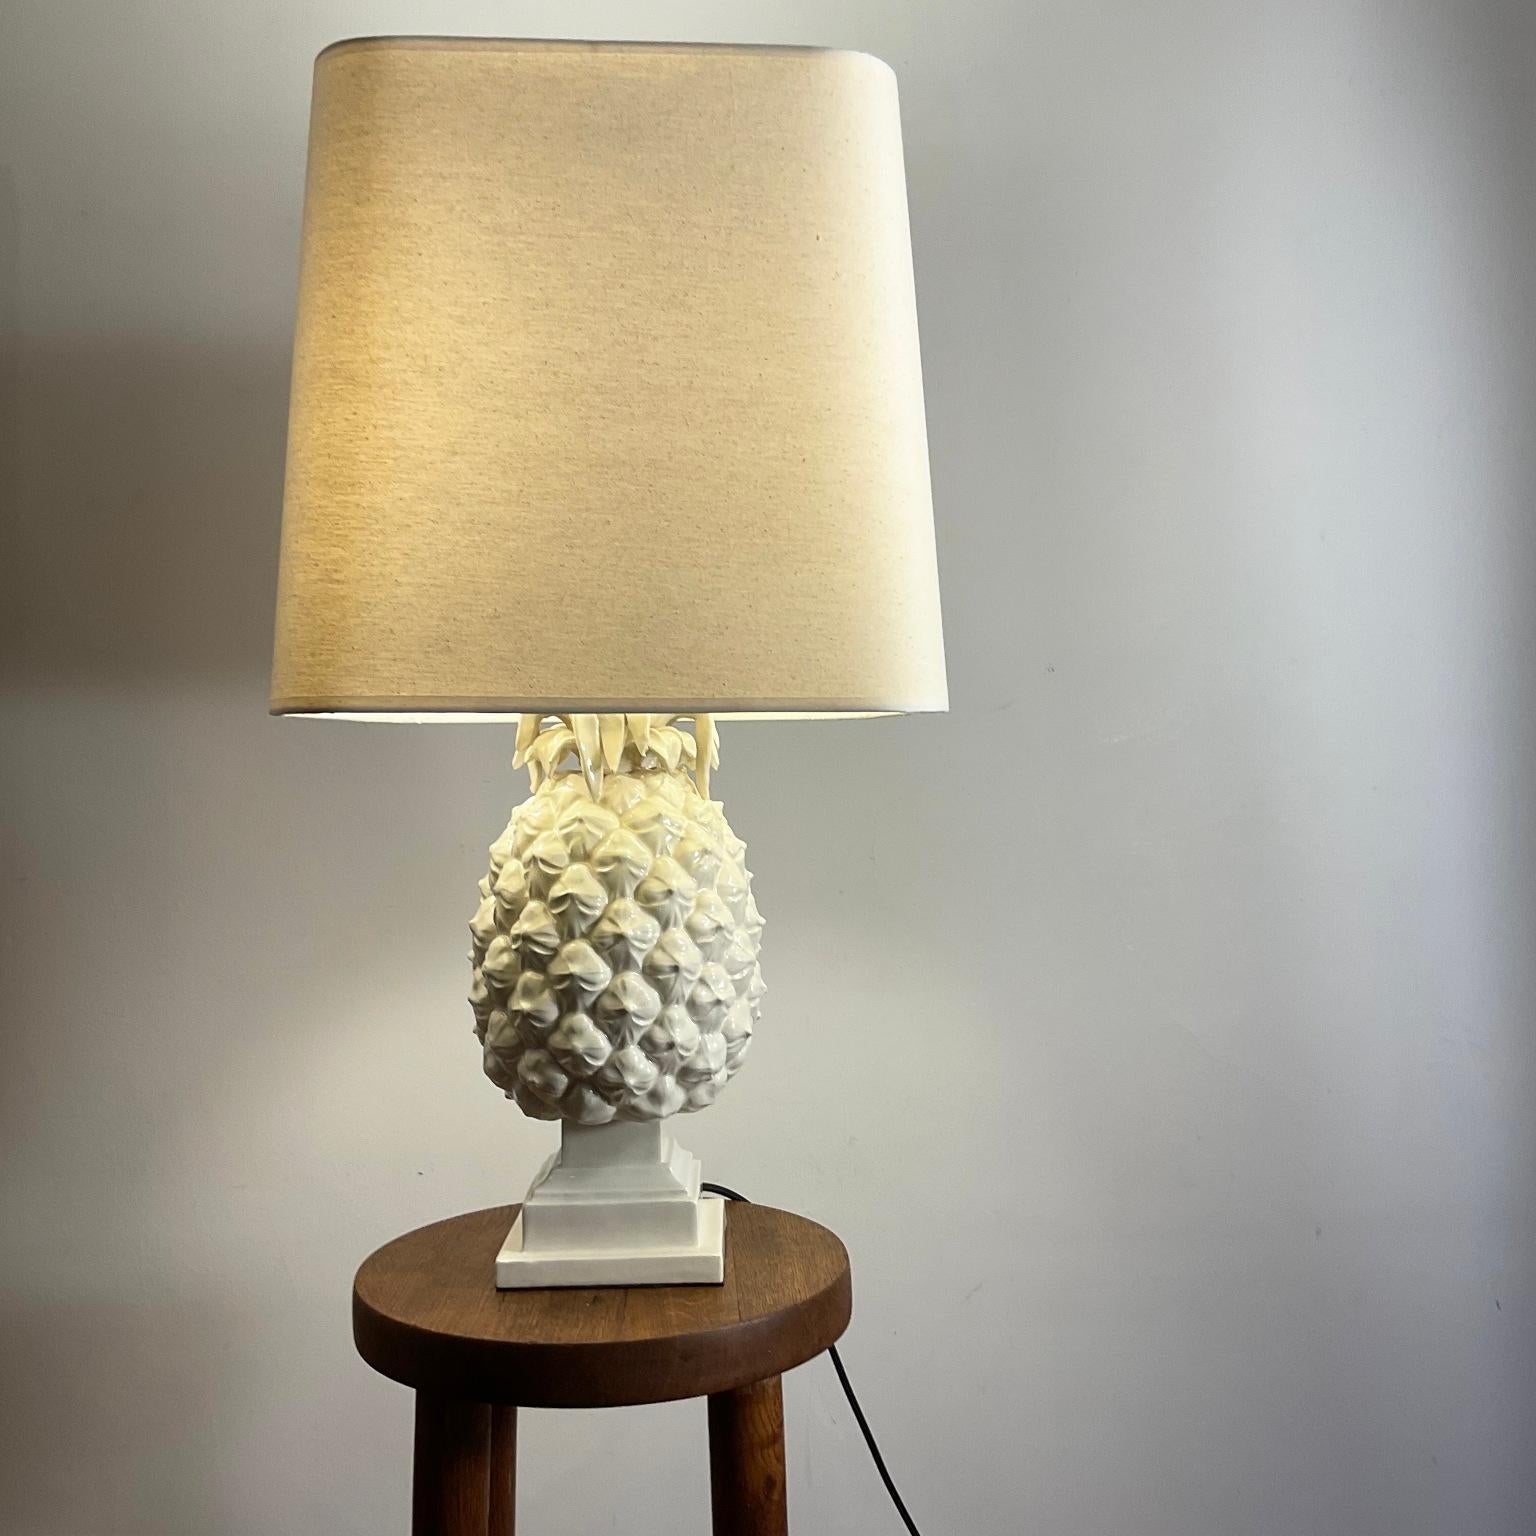 Pineapple Table Lamp in White Glazed Ceramic from Italy 1970s For Sale 2